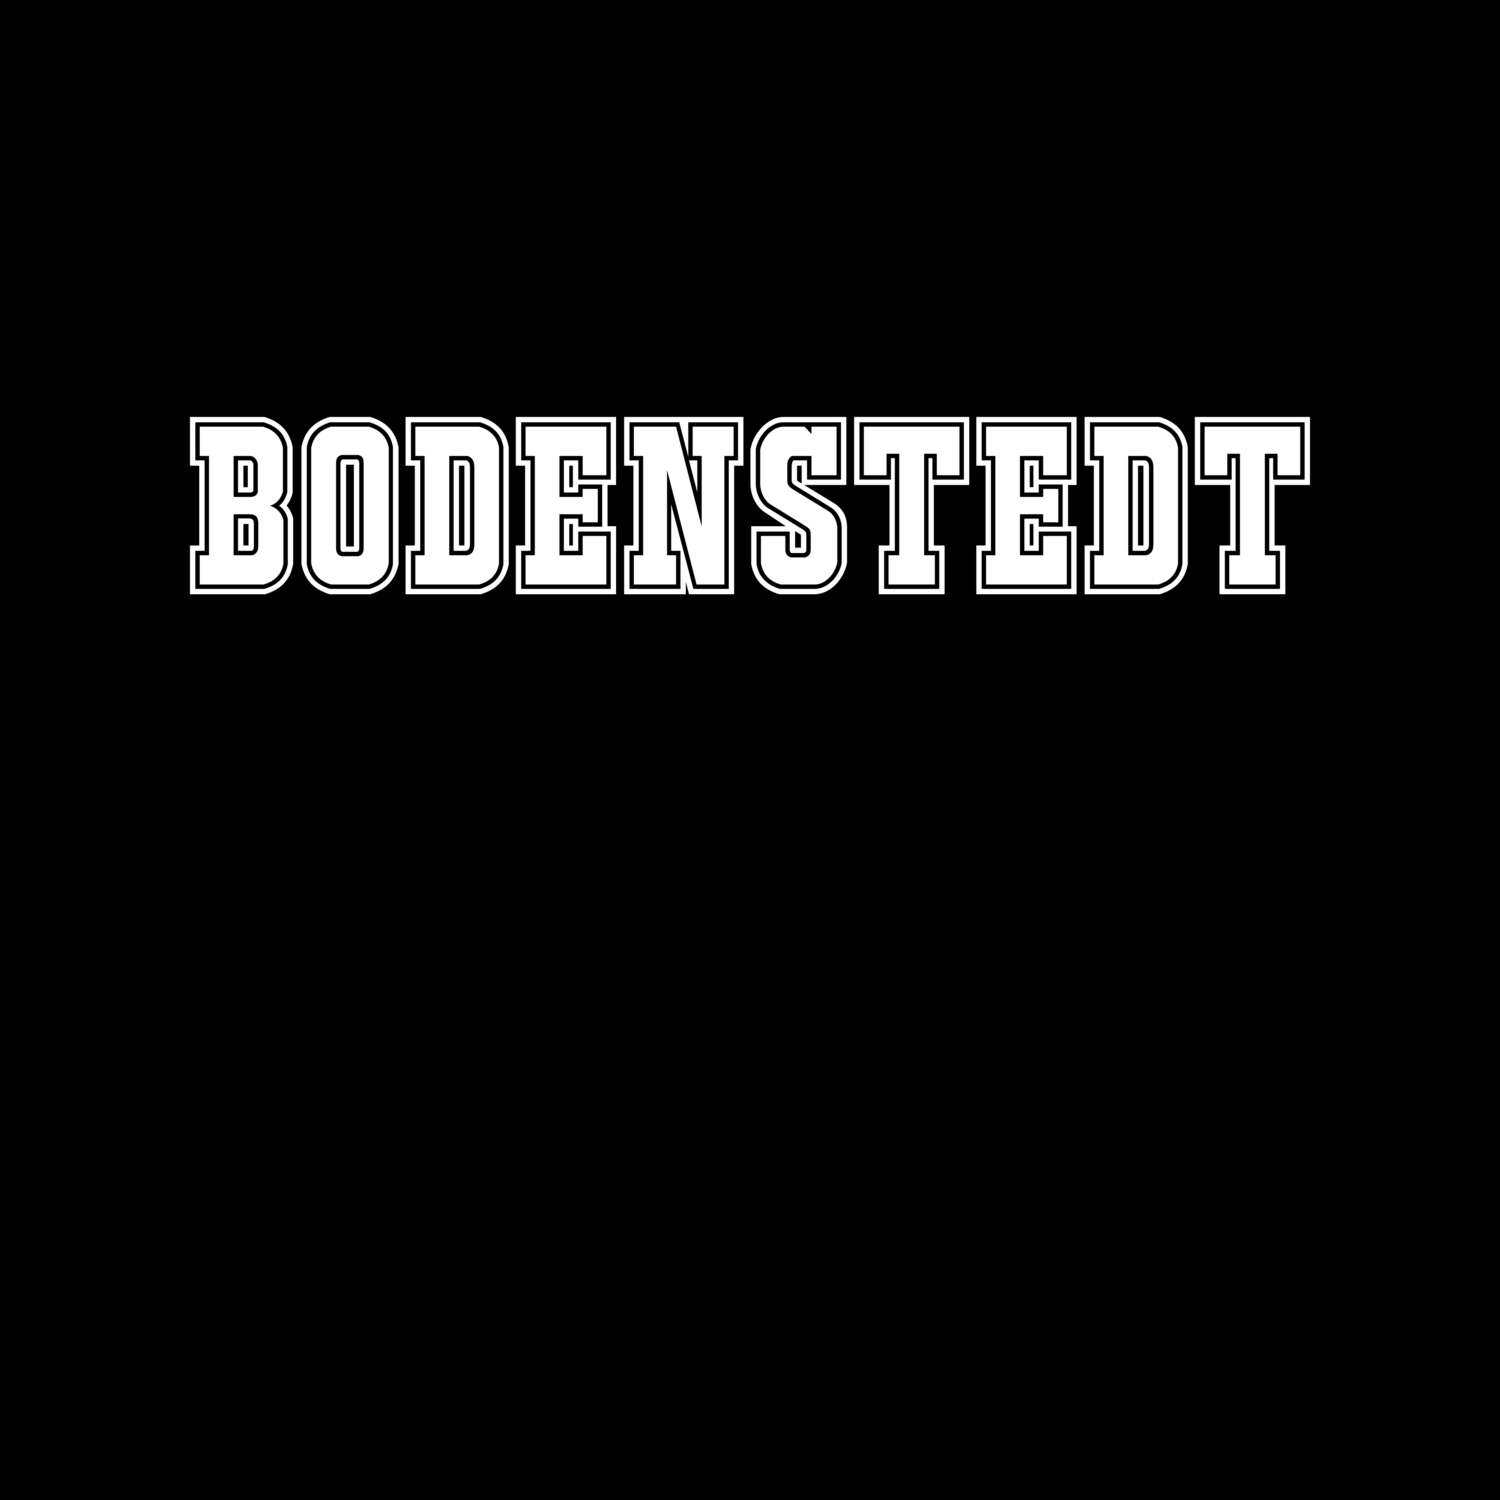 Bodenstedt T-Shirt »Classic«